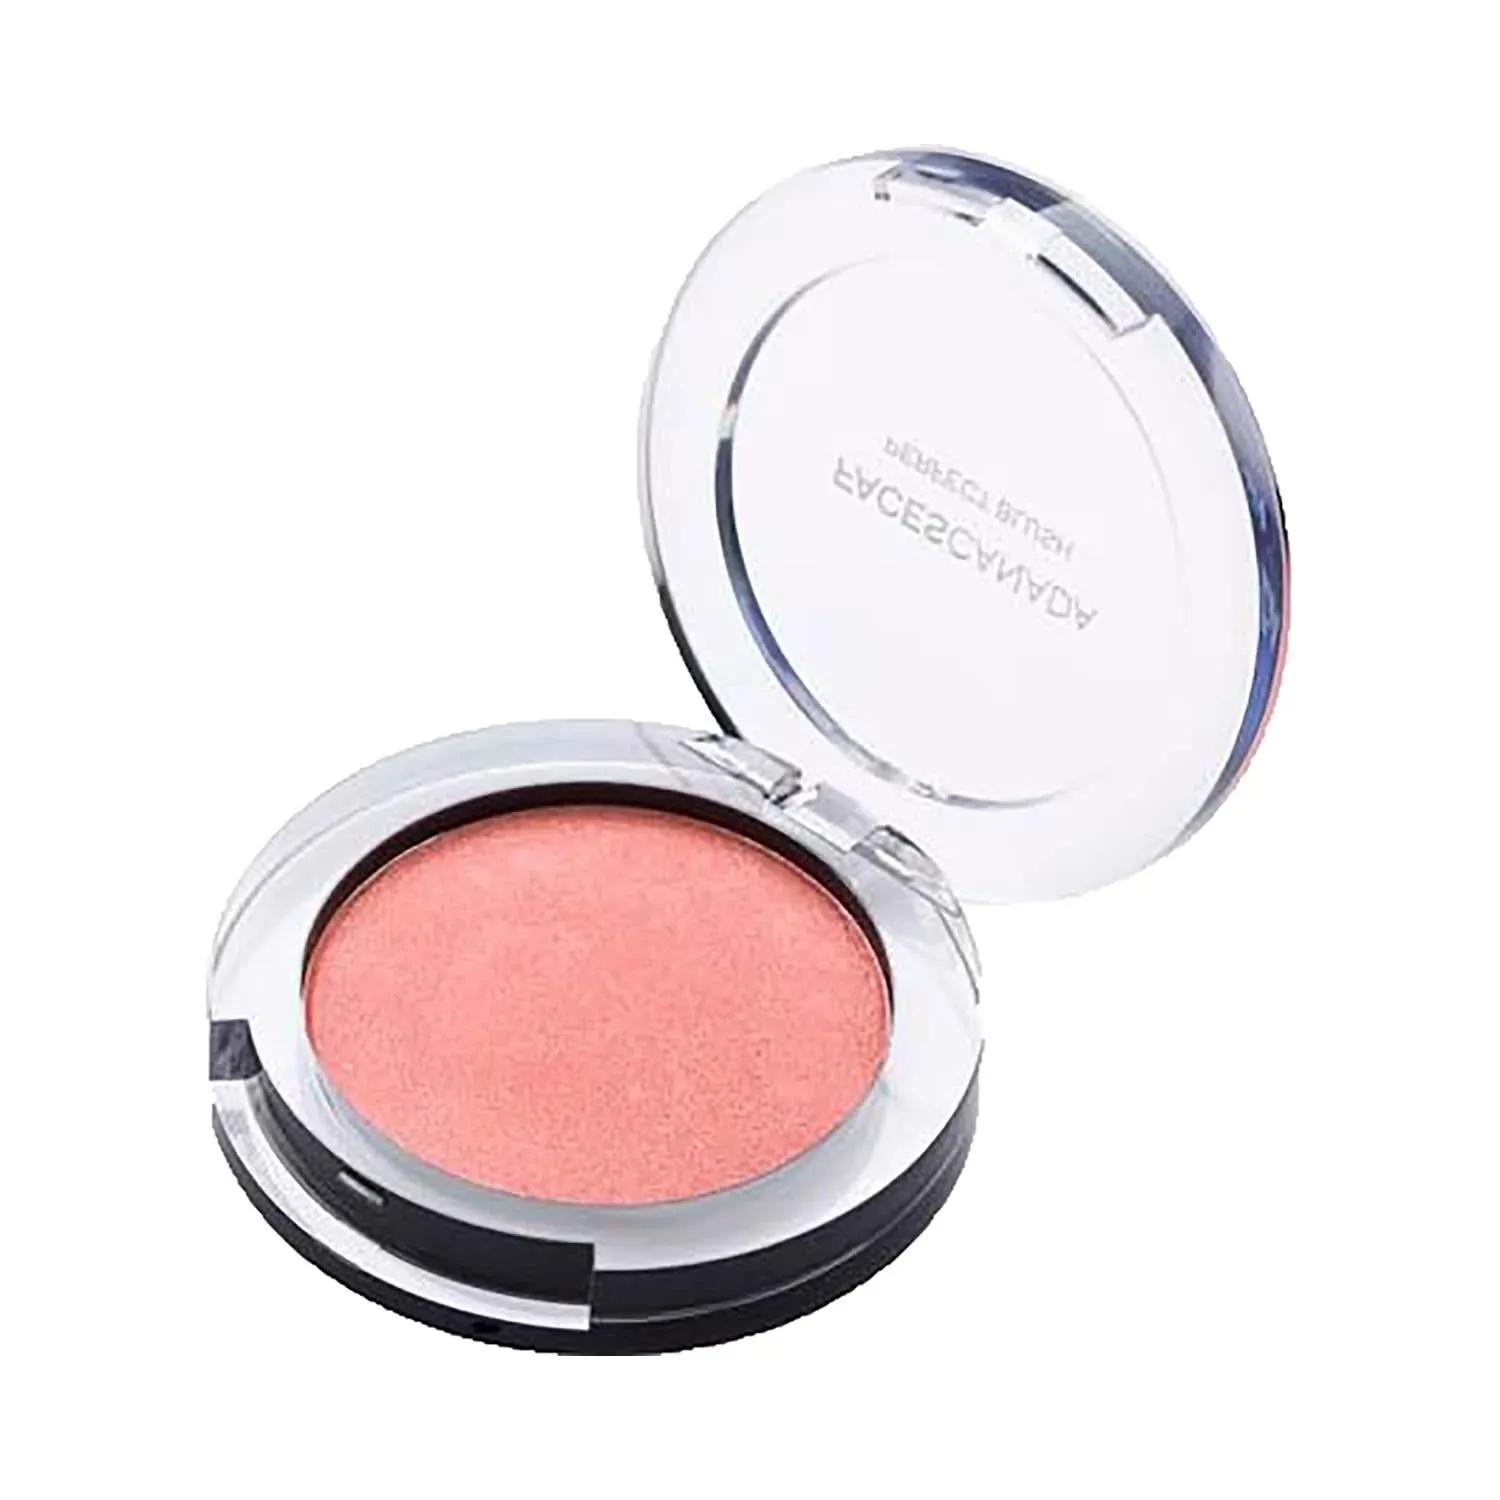 faces canada perfecting blush - 01 coral pink (5g)